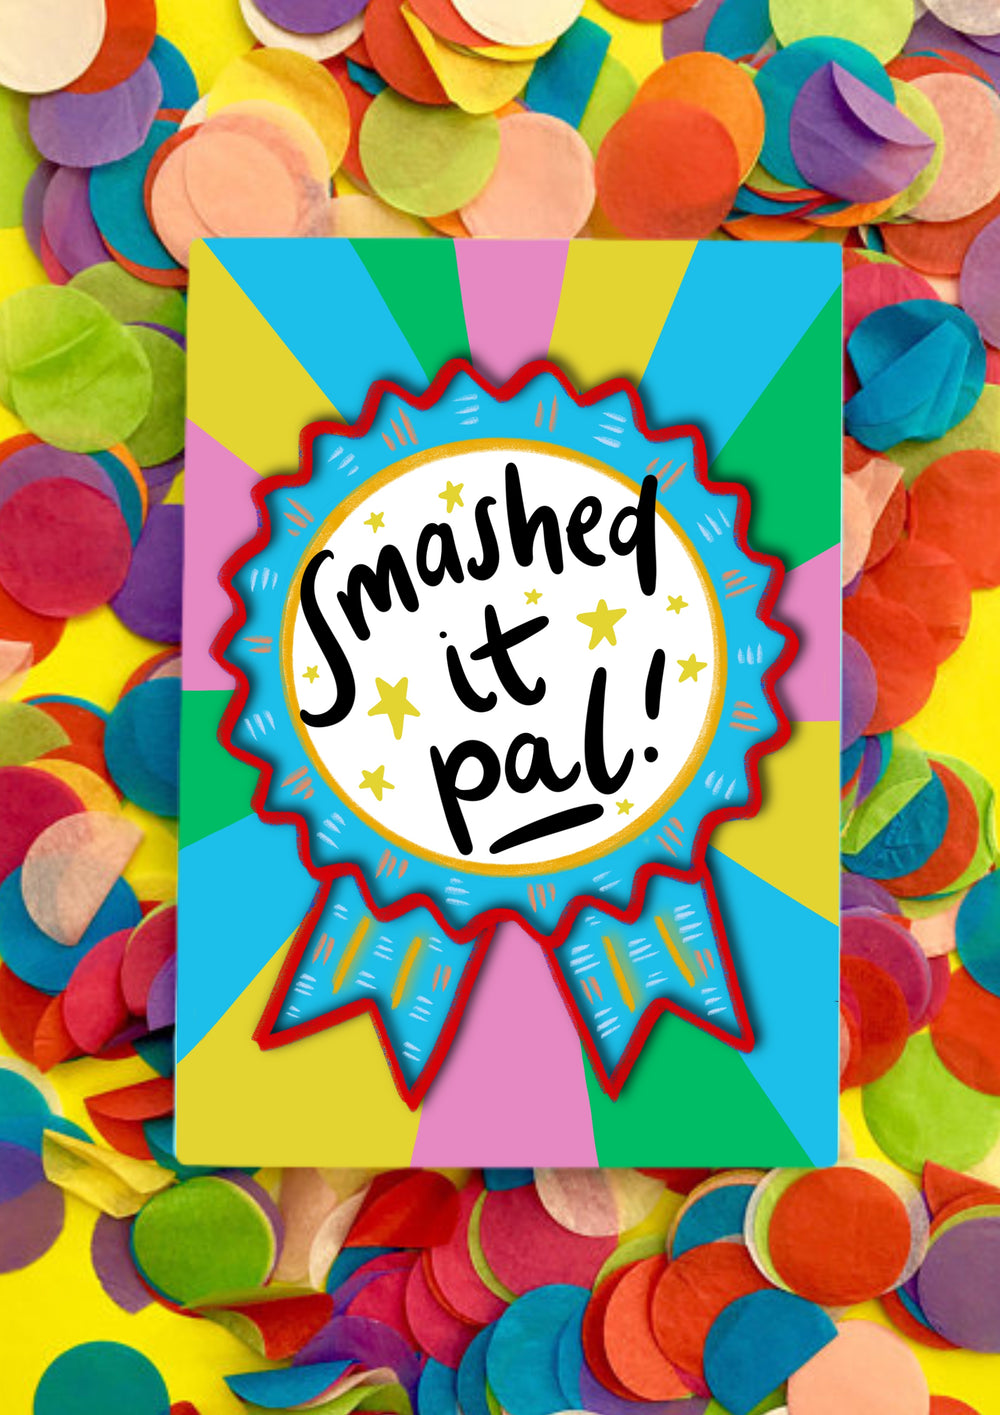 Smashed it Pal! Congratulations Greetings Card